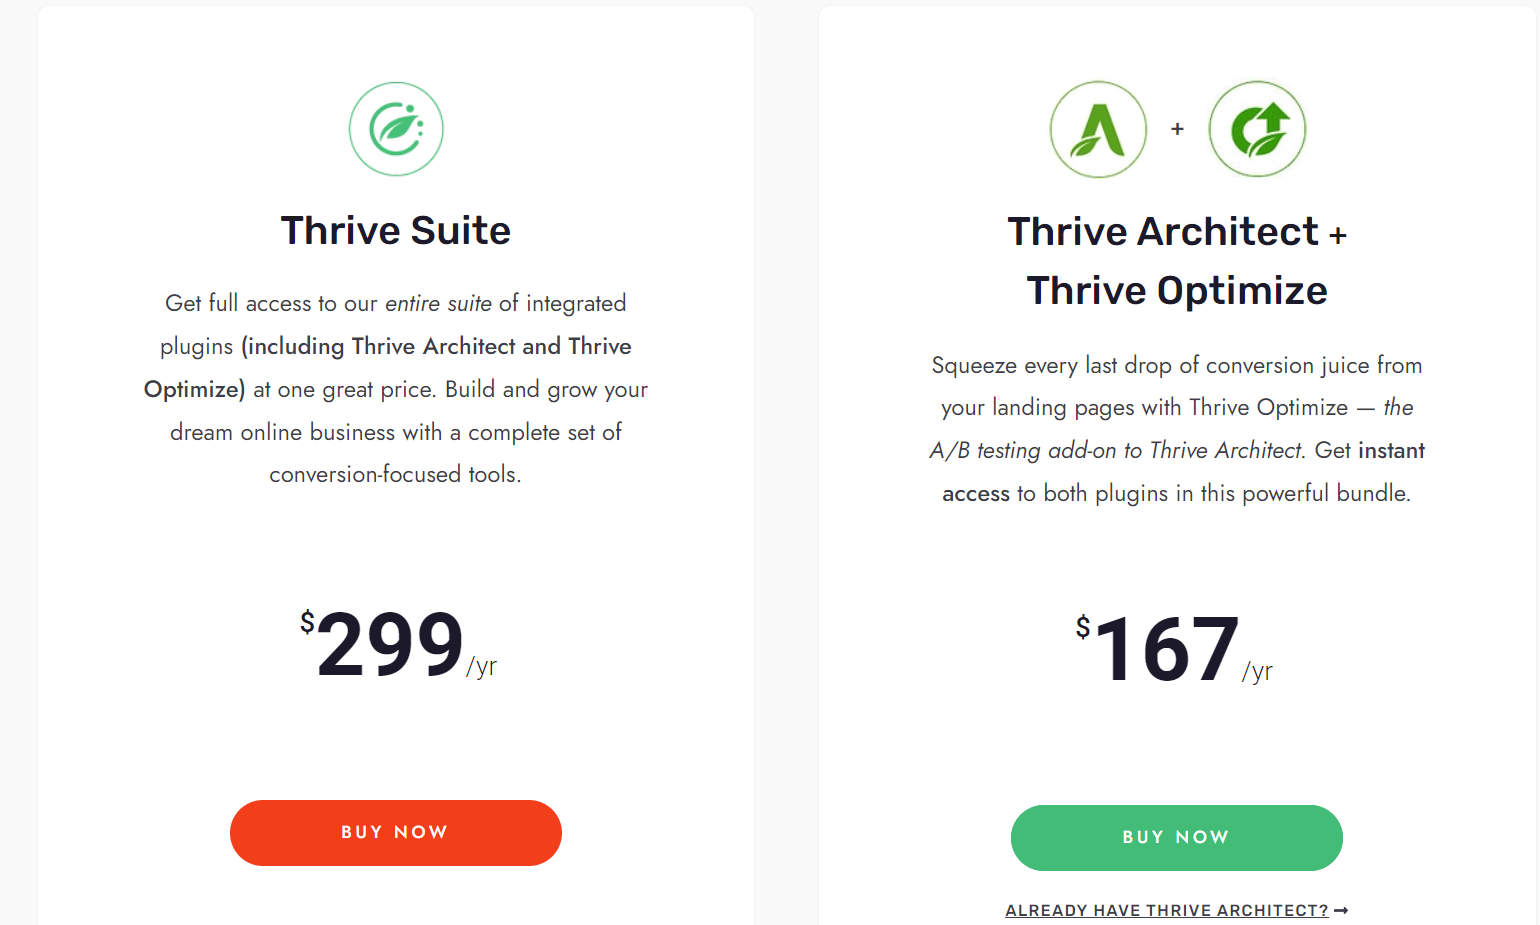 Thrive optimize pricing